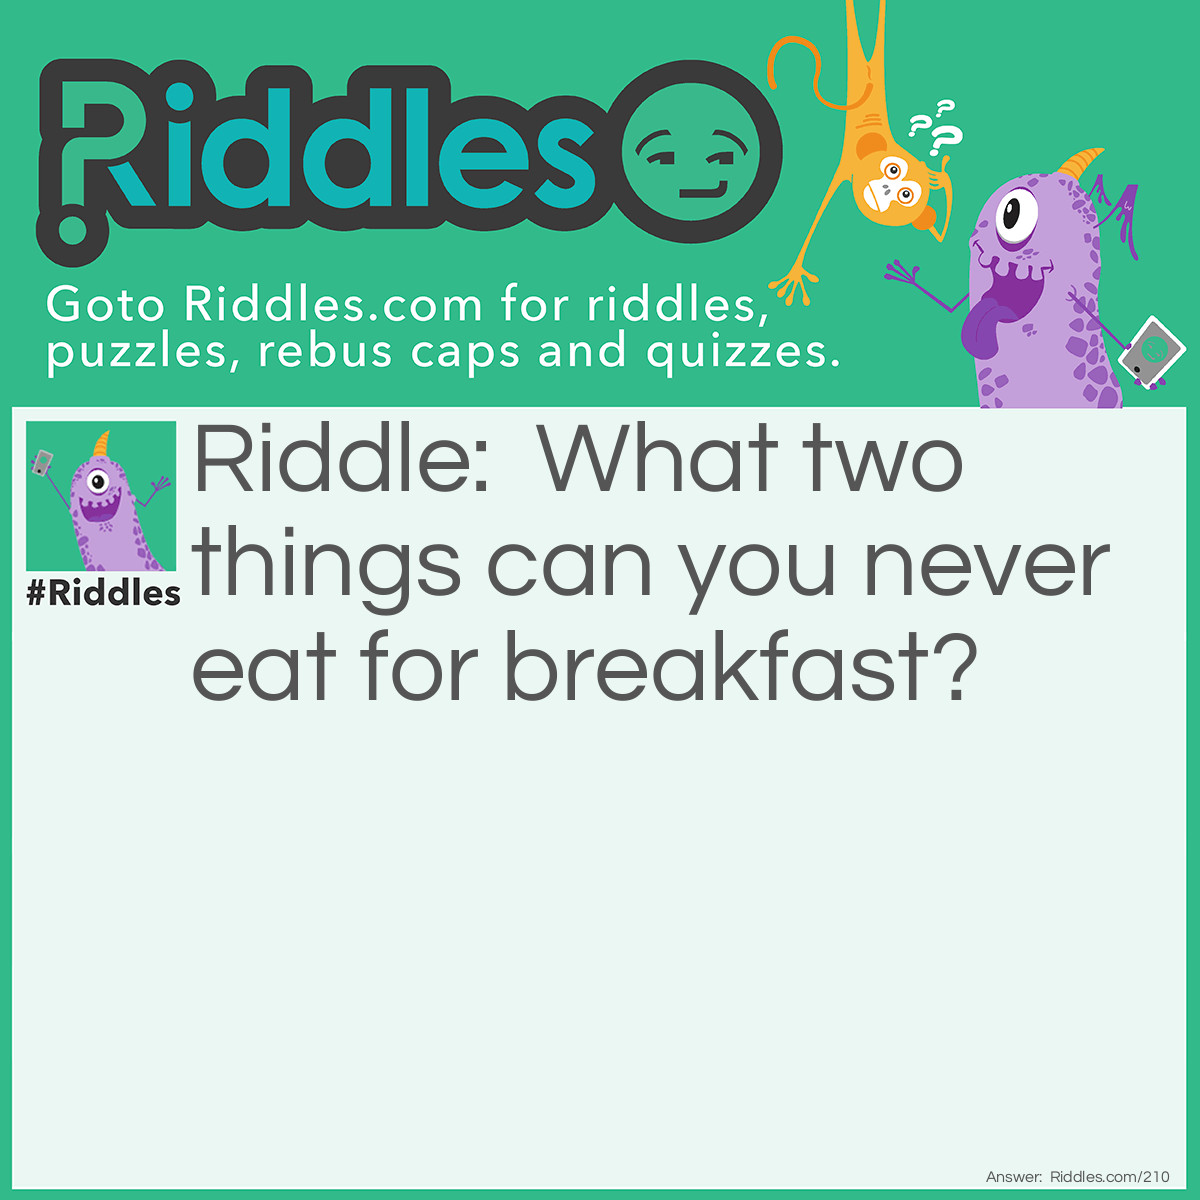 Riddle: What two things can you never eat for breakfast? Answer: Lunch and dinner.